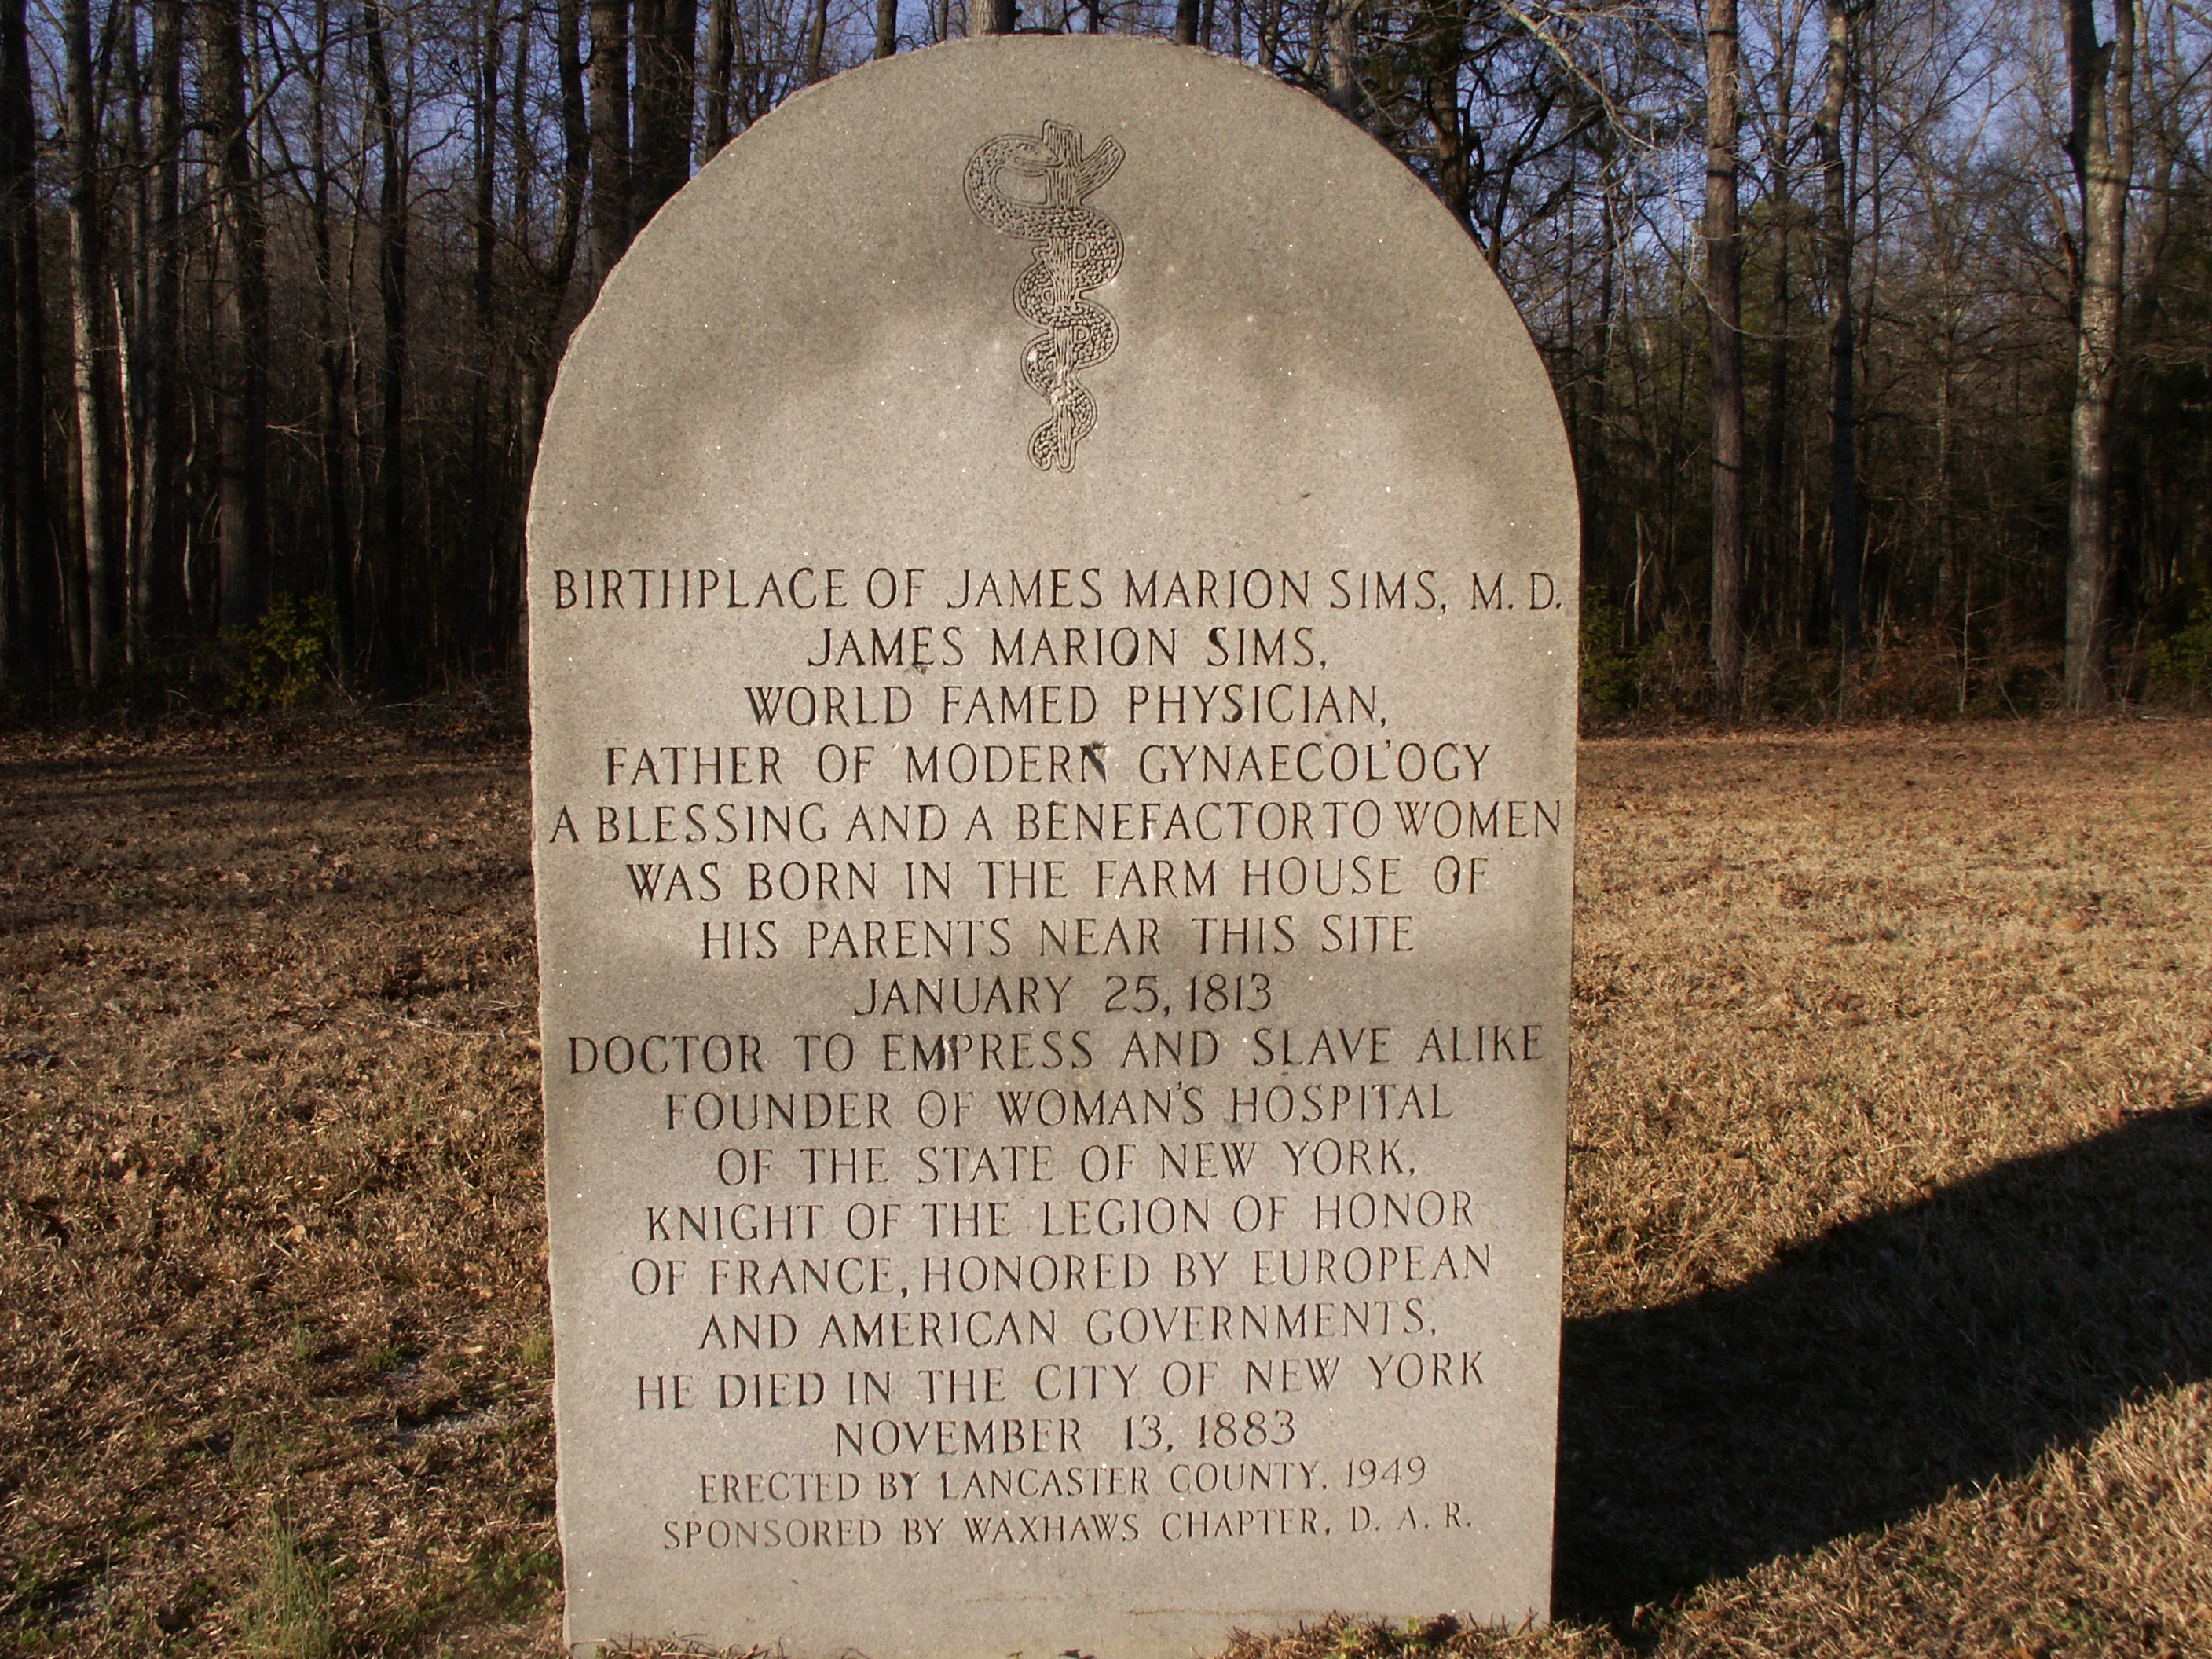 Birthplace of James Marion Sims, M.D. Marker